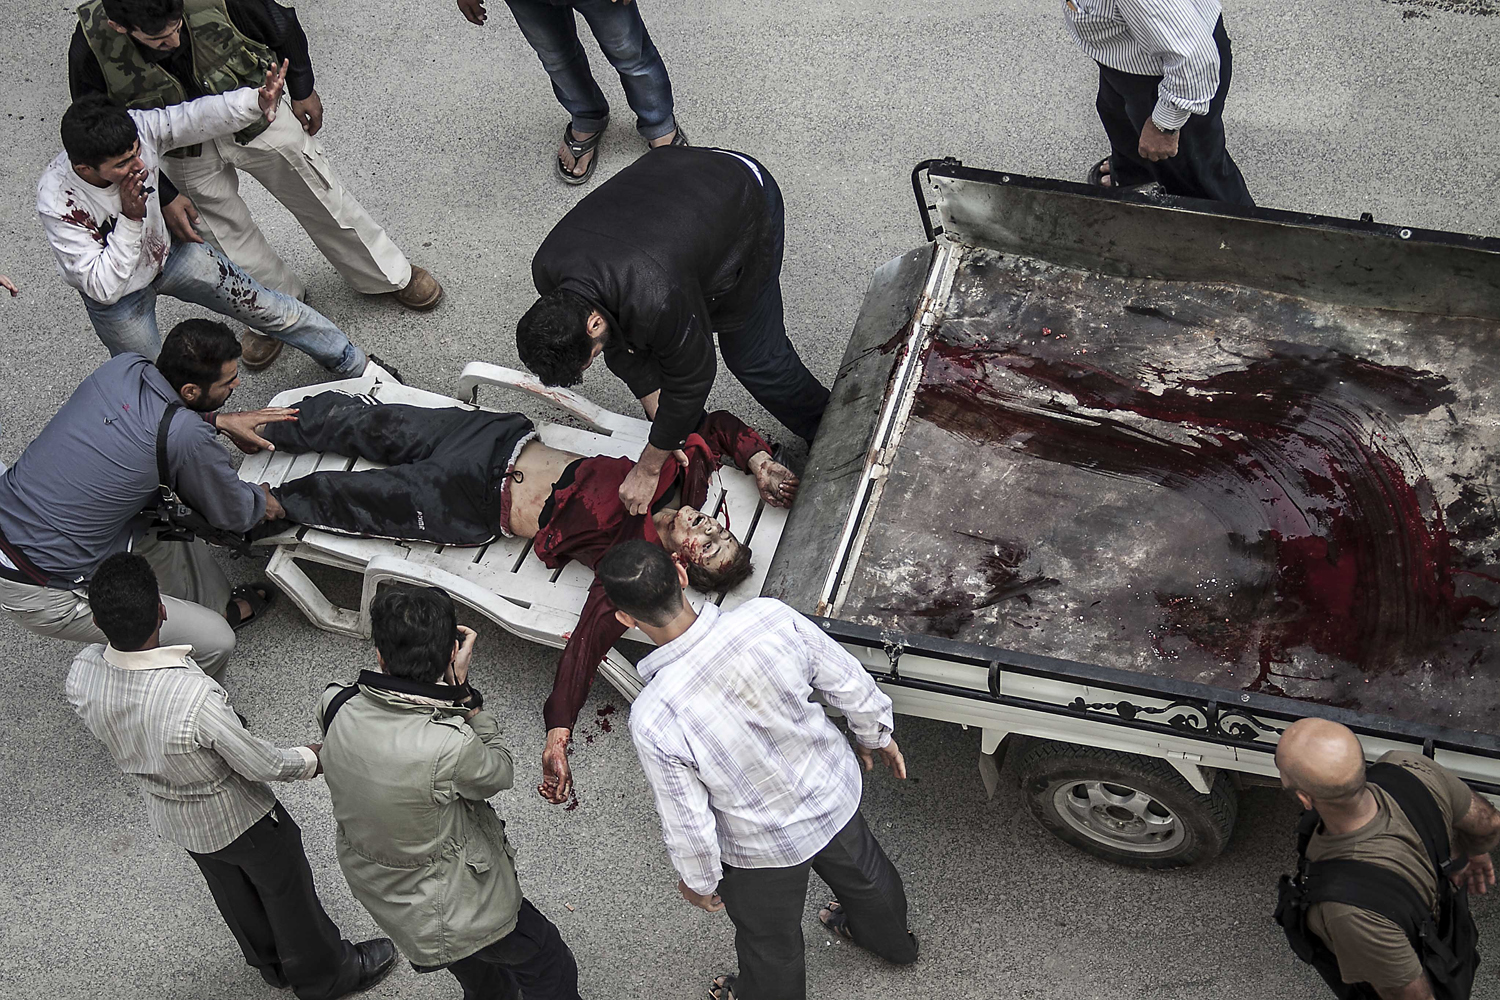 Image: Oct. 23, 2012. Syrian residents carry the lifeless body of a boy killed by an artillery shell that landed near a bakery, in front of a hospital in Aleppo, Syria.